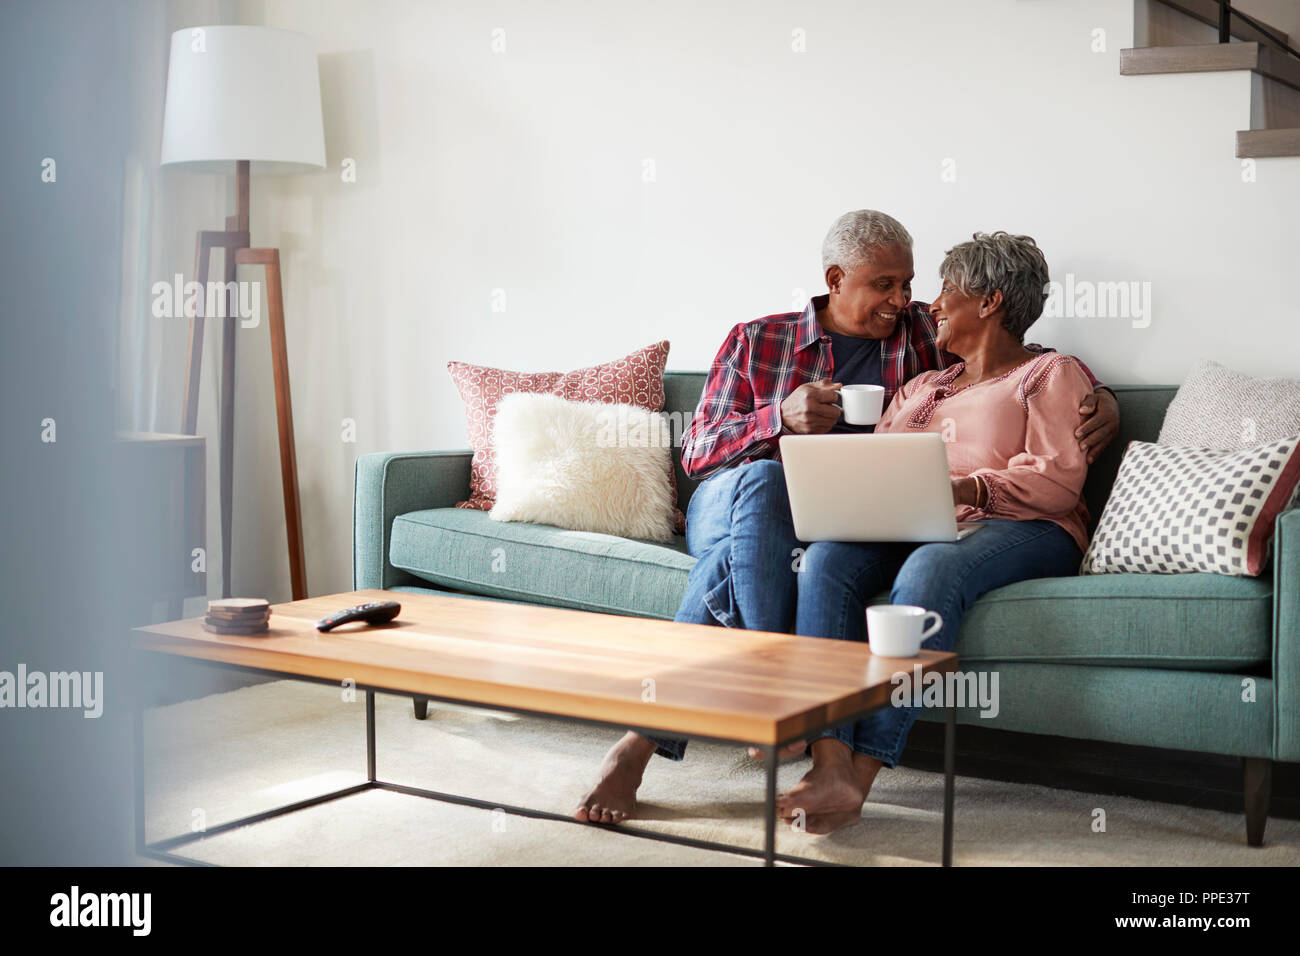 Senior Couple Sitting On Sofa At Home Using Laptop To Shop Online Stock Photo